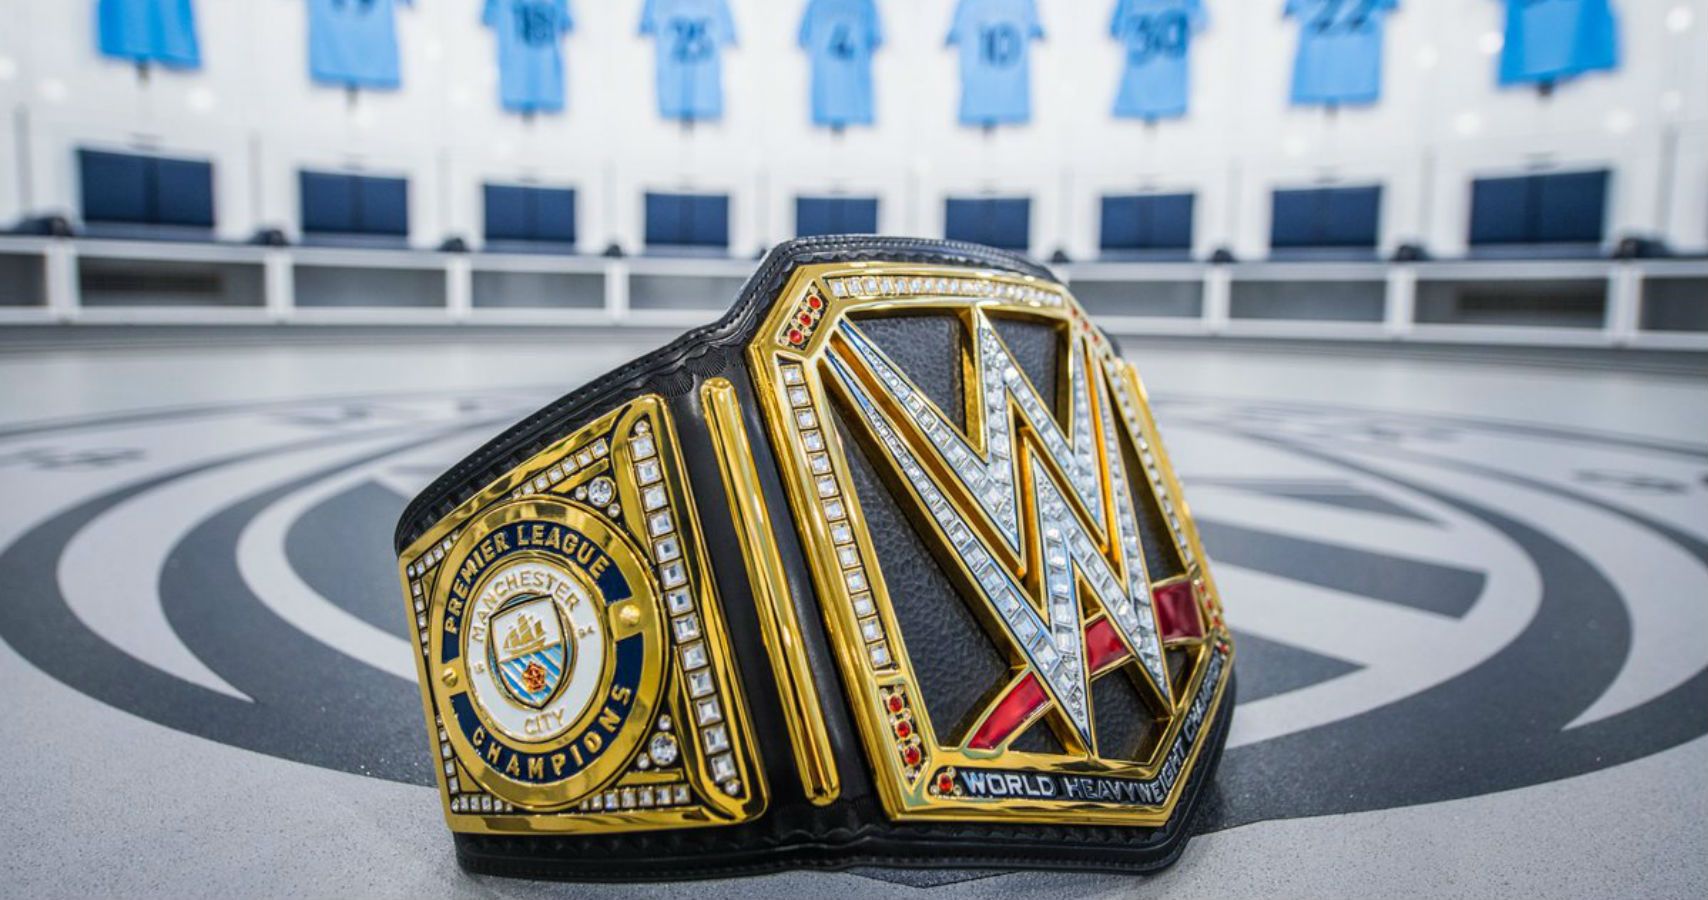 WWE Award Manchester City Their Very Own WWE Championship